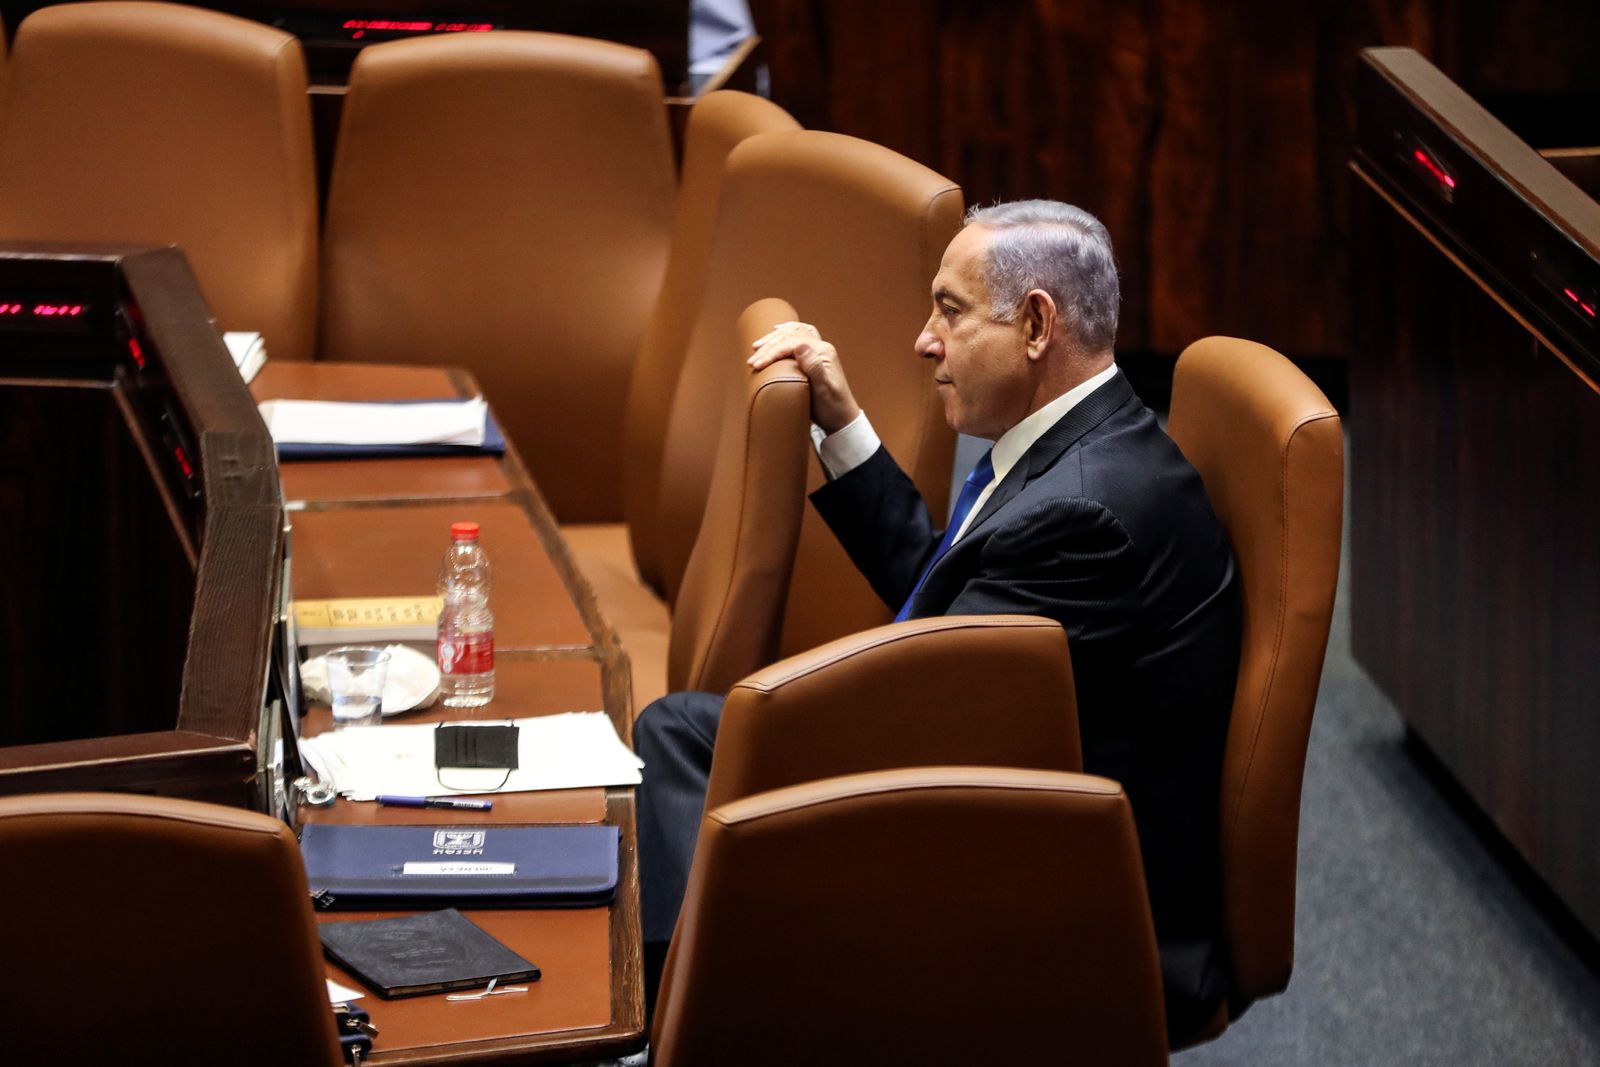 Israeli Prime Minister Benjamin Netanyahu looks on during a special session of the Knesset, Israel's parliament, whereby a confidence vote will be held to approve and swear-in a new coalition government, in Jerusalem - REUTERS